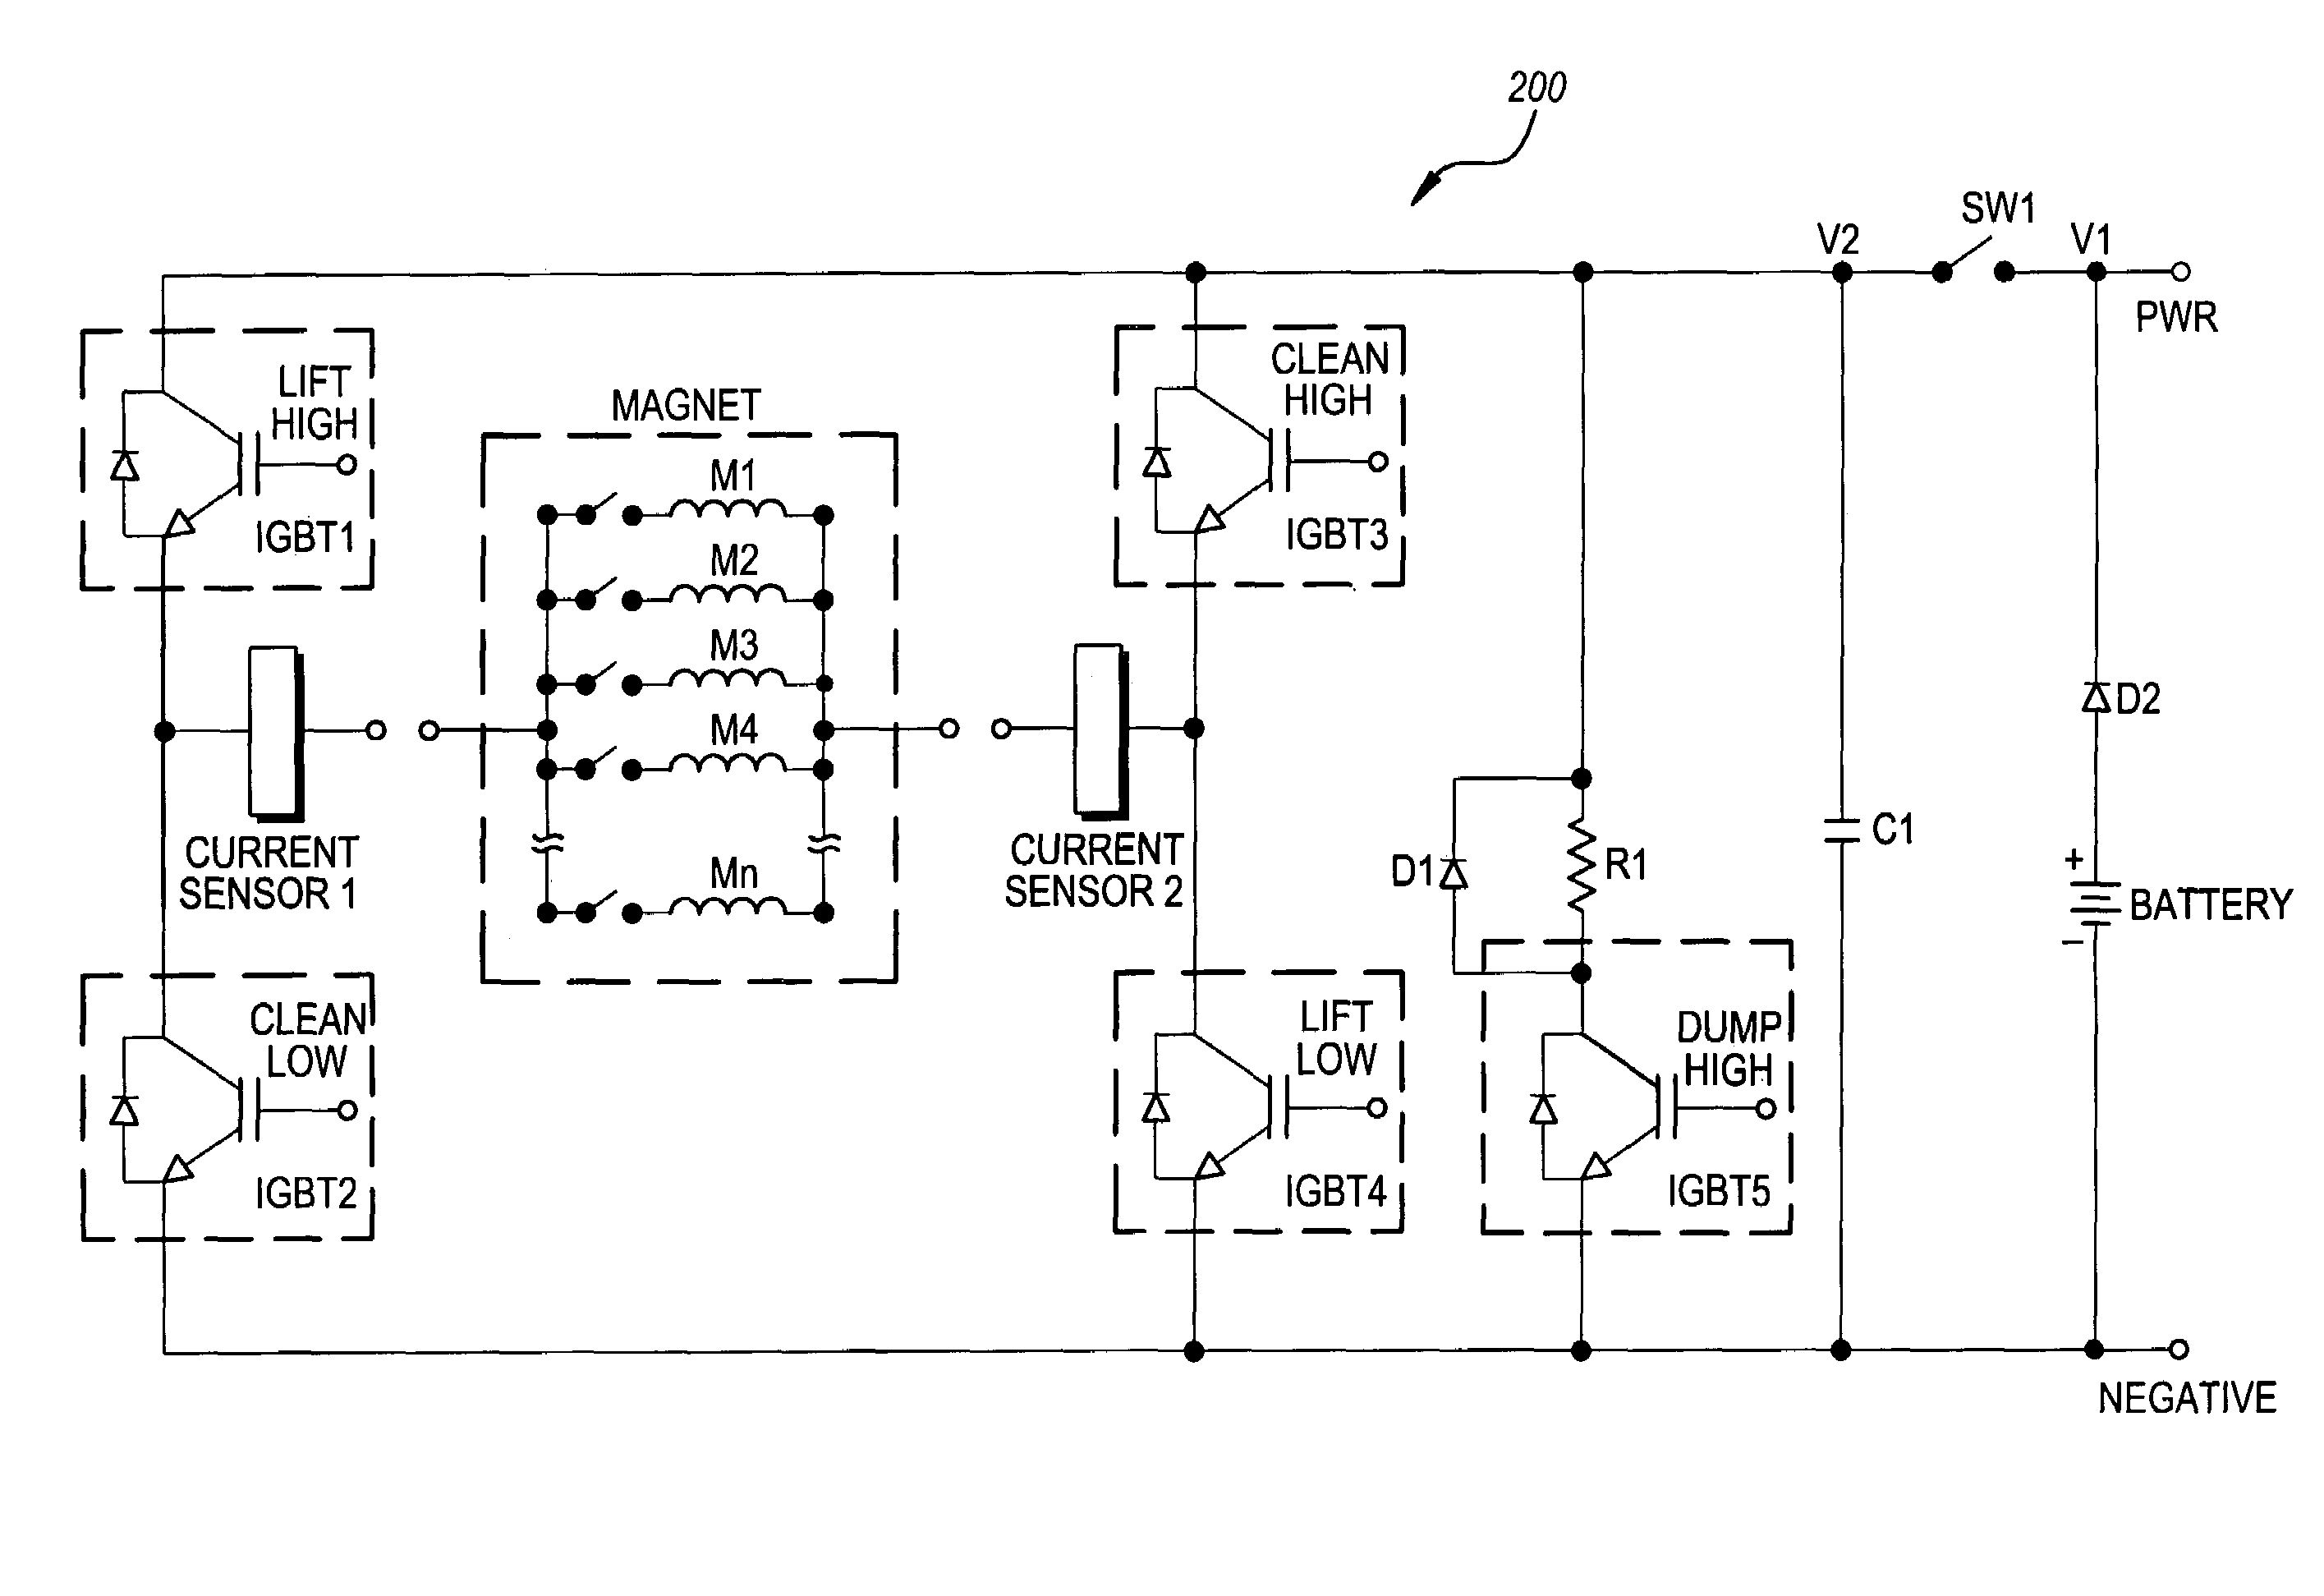 Solid-state magnet control